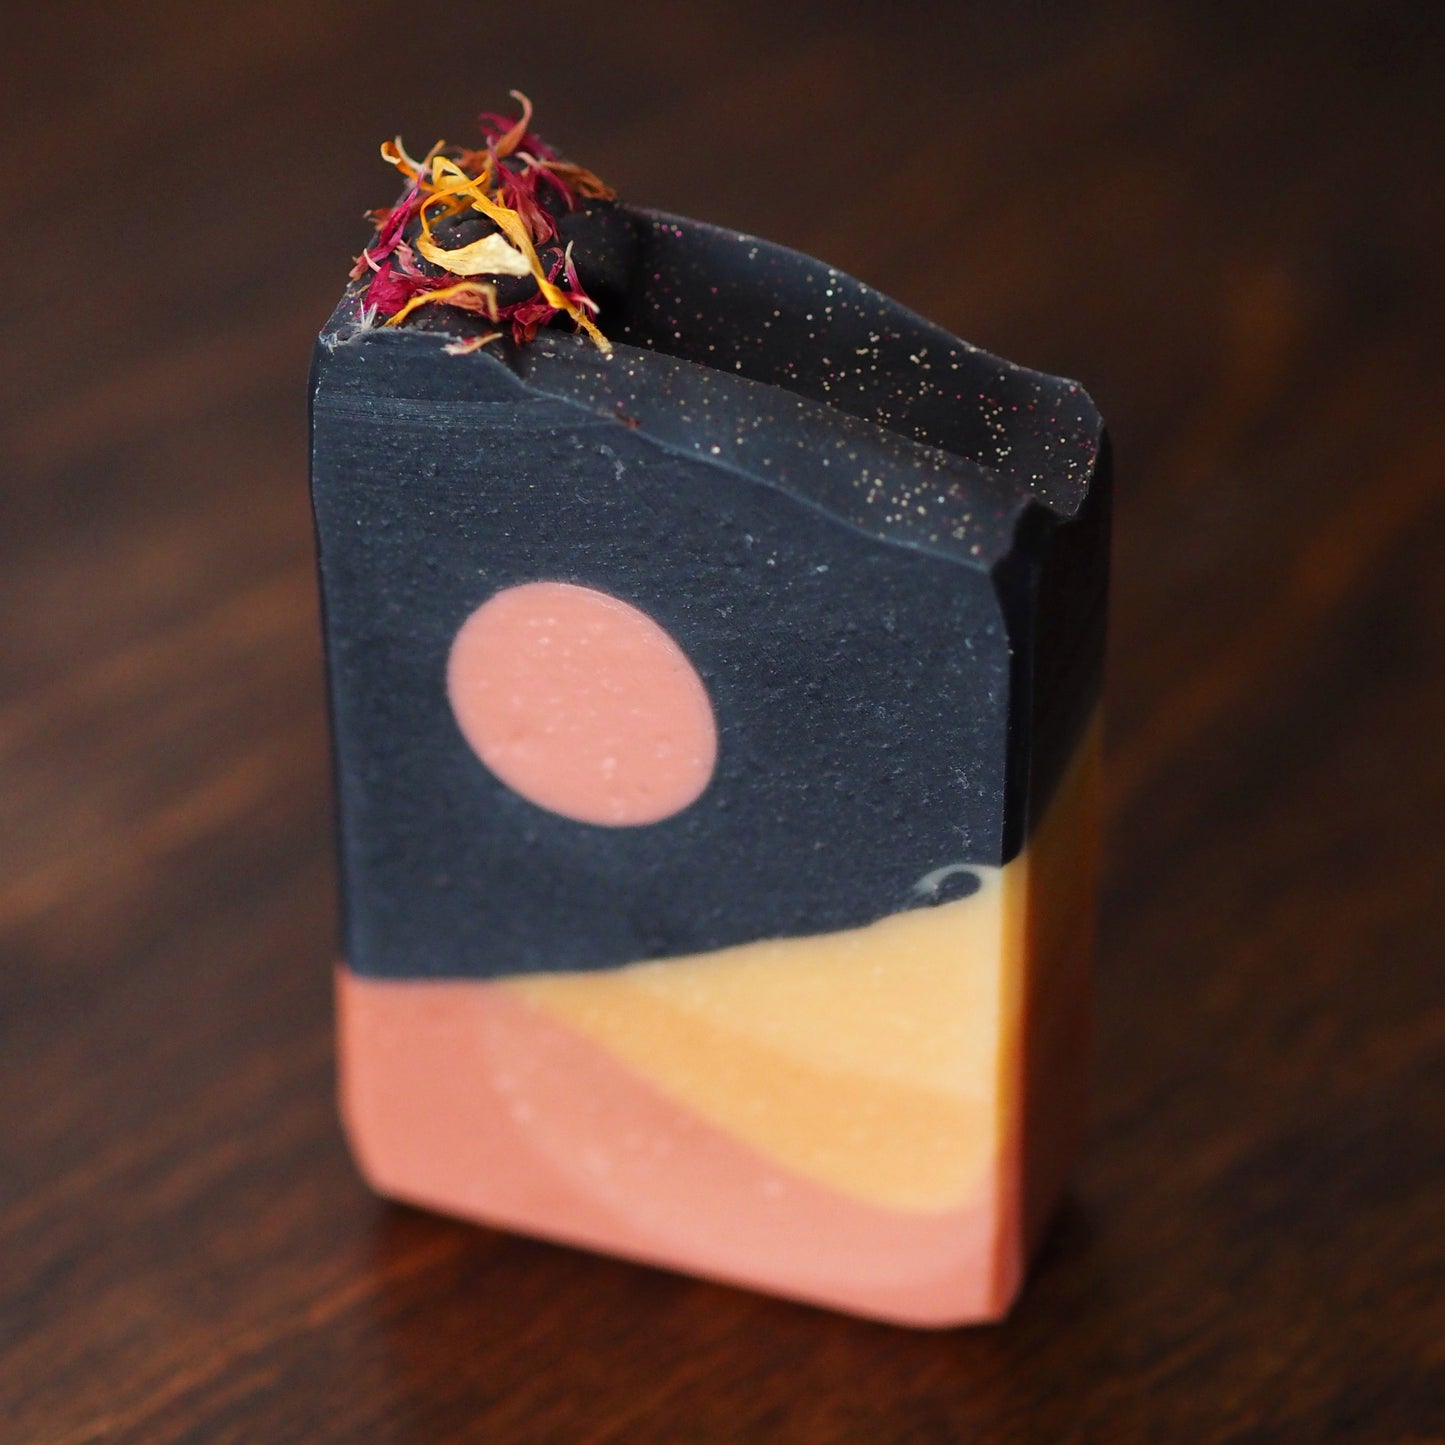 Flower Moon - May Full Moon Limited Edition Artisan Soap